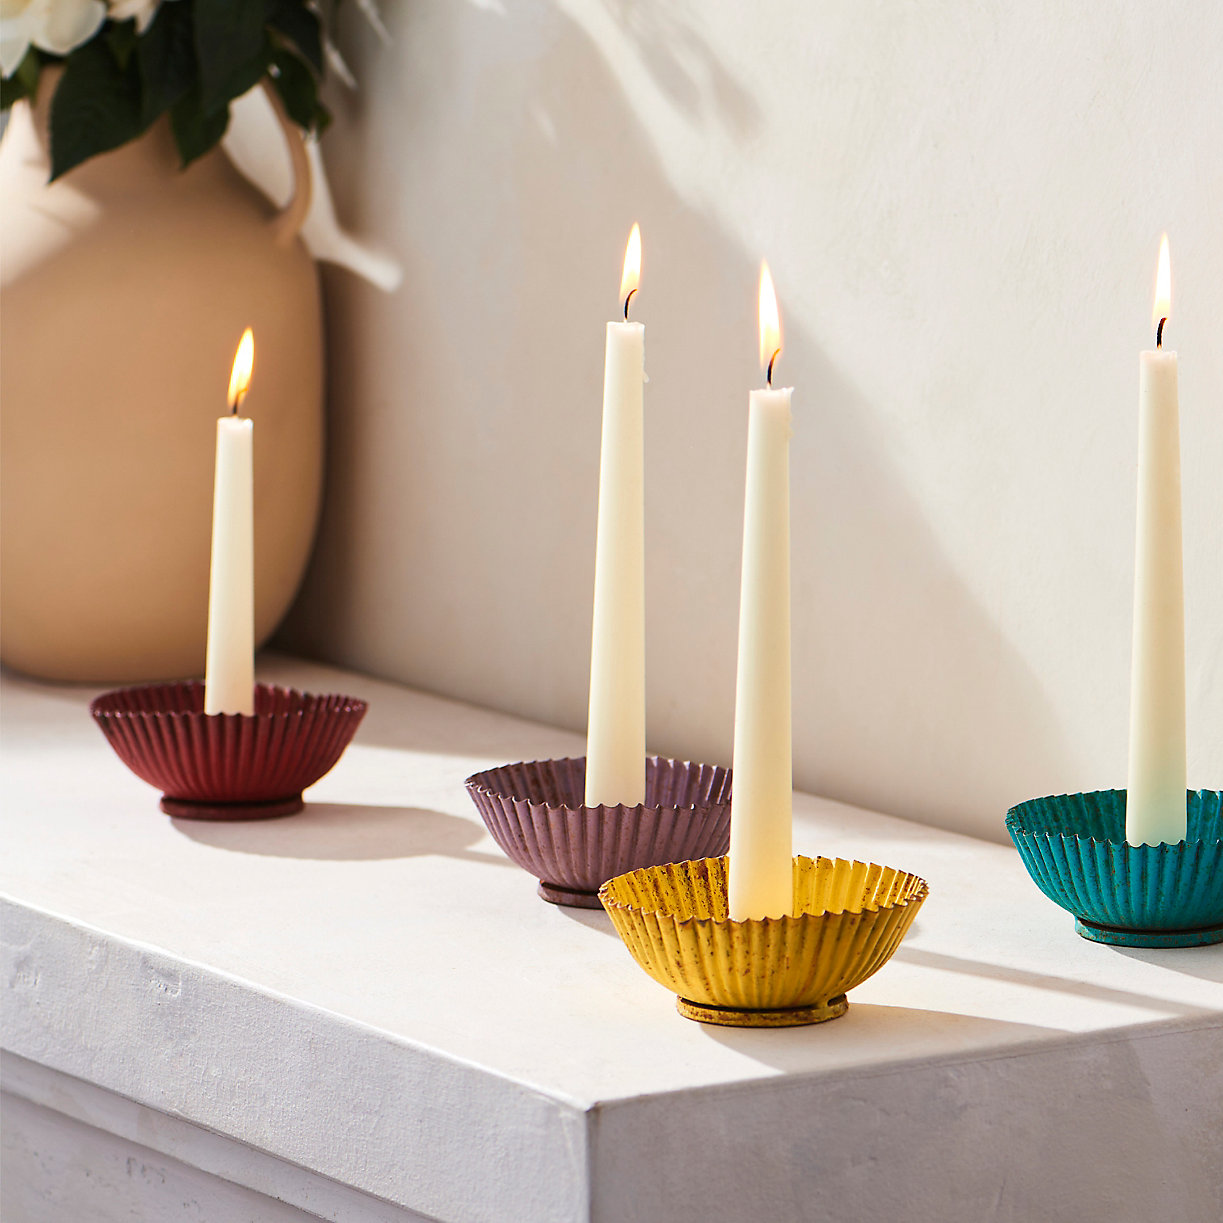 Ruffle taper candleholder in a variety of colors from Terrain.